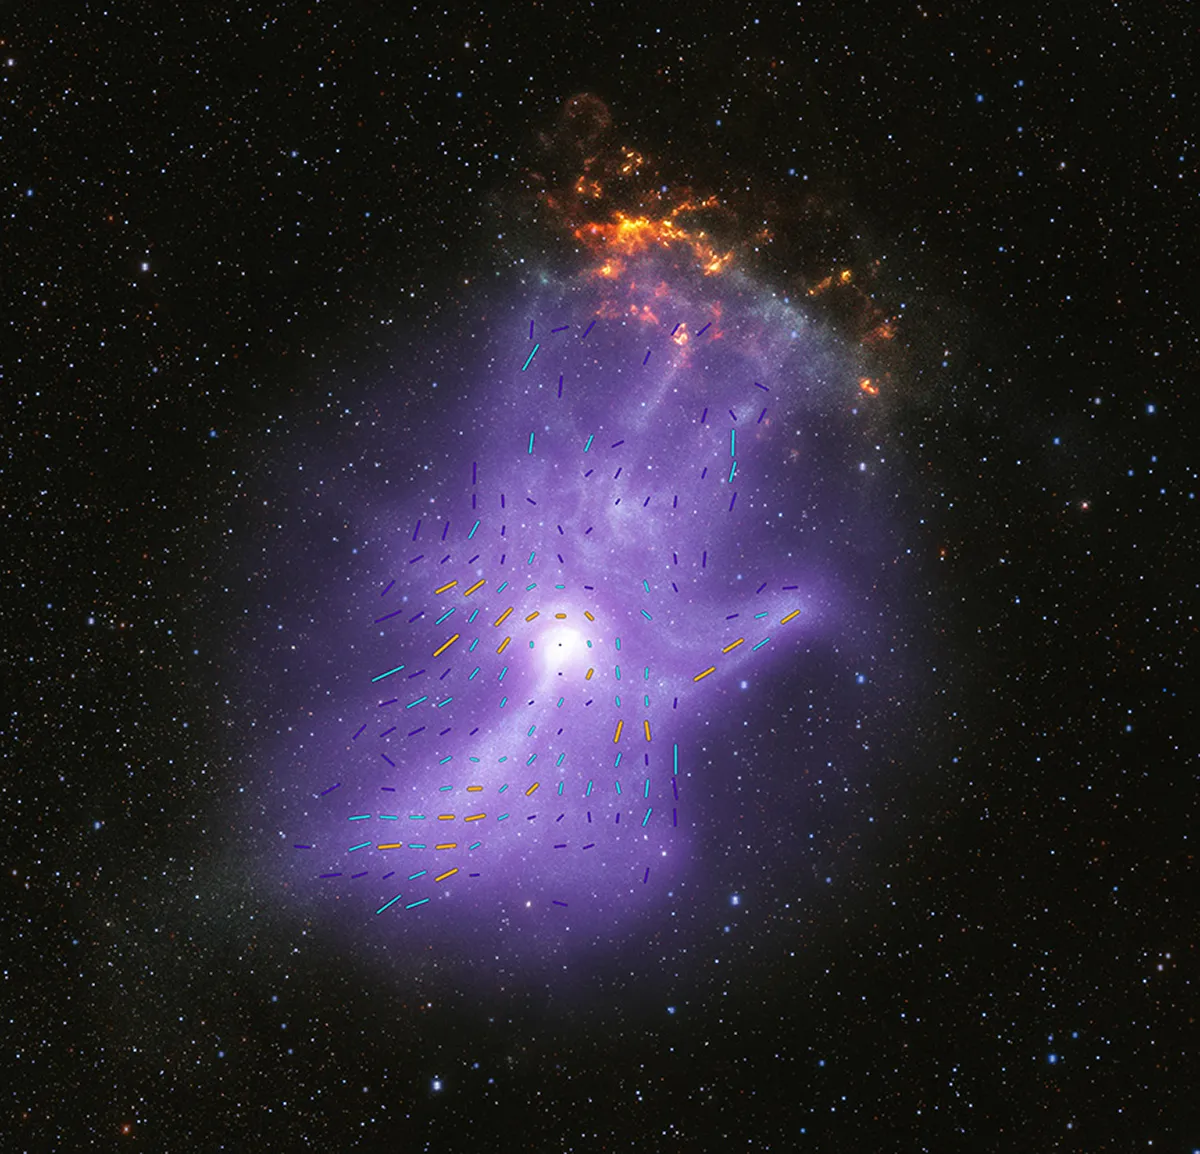 A view of pulsar wind nebula MSH 15-52, famous for looking like a ghostly cosmic hand. Lines show the mapping of the magnetic field. Credit: X-ray: NASA/CXC/Stanford Univ./R. Romani et al. (Chandra); NASA/MSFC (IXPE); Infrared: NASA/JPL-Caltech/DECaPS; Image Processing: NASA/CXC/SAO/J. Schmidt